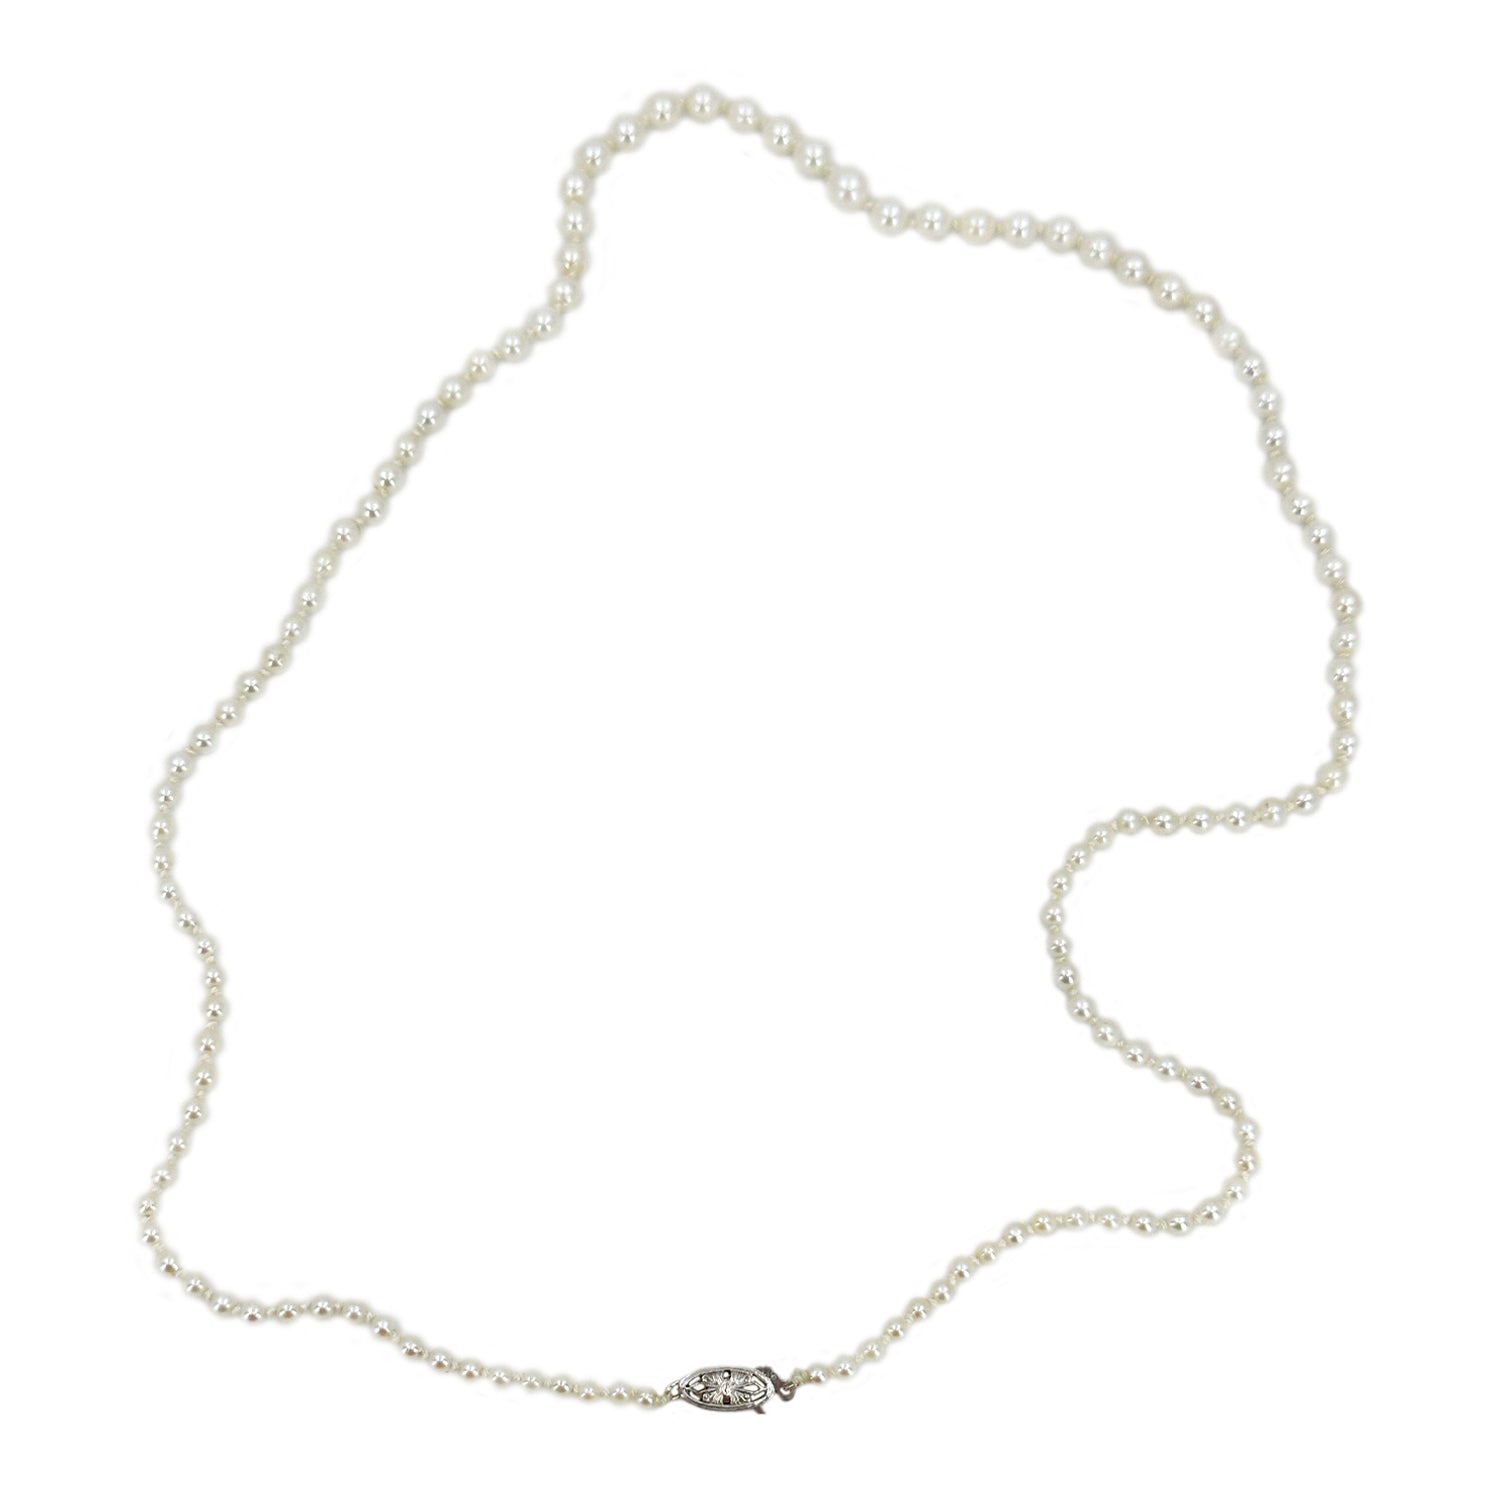 Petite Vintage Semi-Baroque Japanese Saltwater Cultured Akoya Pearl Necklace - 14K White Gold 20.25 Inch